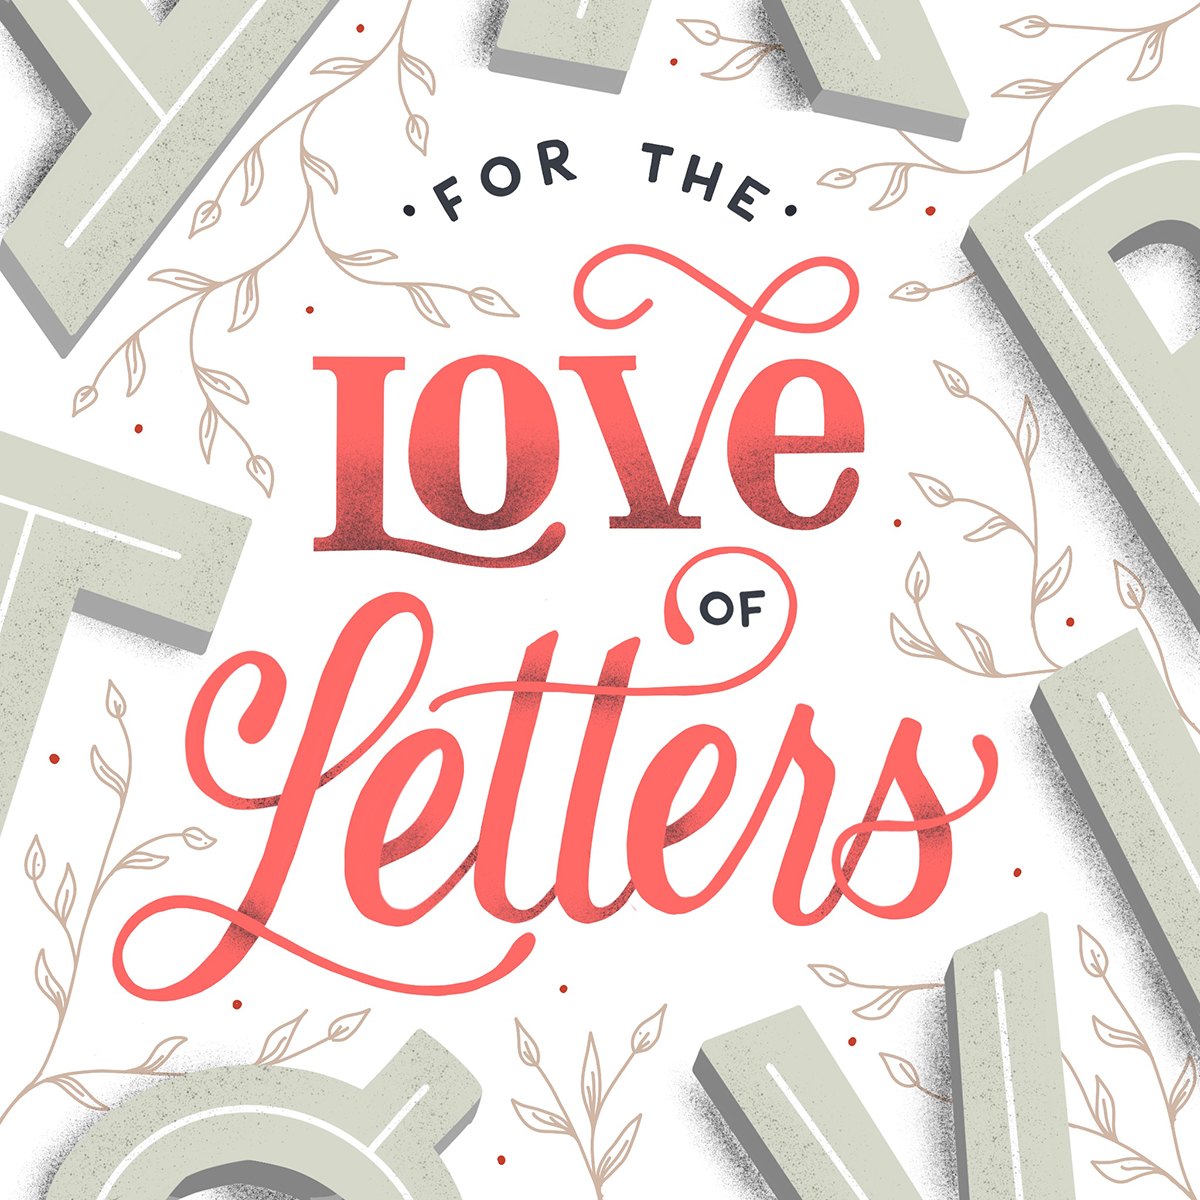 textured custom hand lettering illustration, reads 'for the love of letters' in mixed embellished and modern styles, with vines.